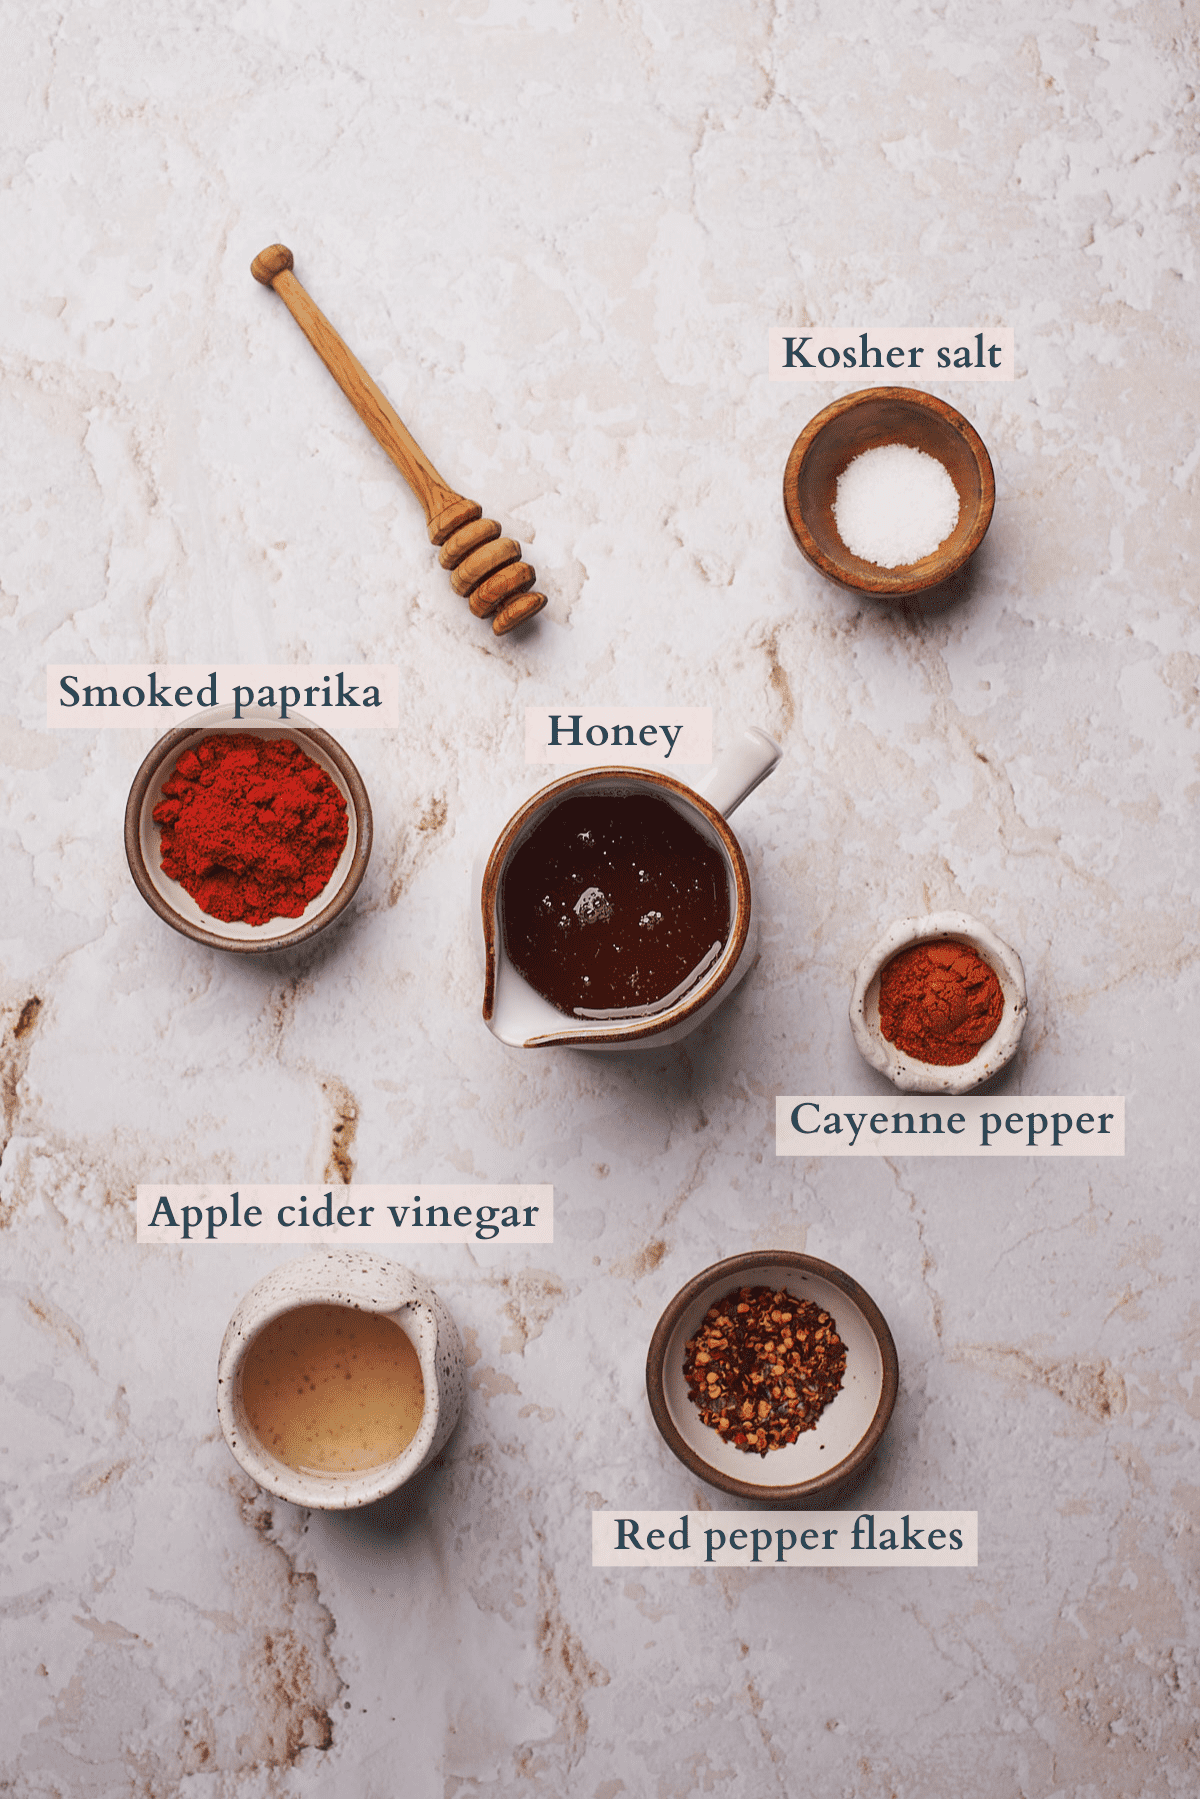 hot honey ingredients with text overlaying to denote each ingredient.  